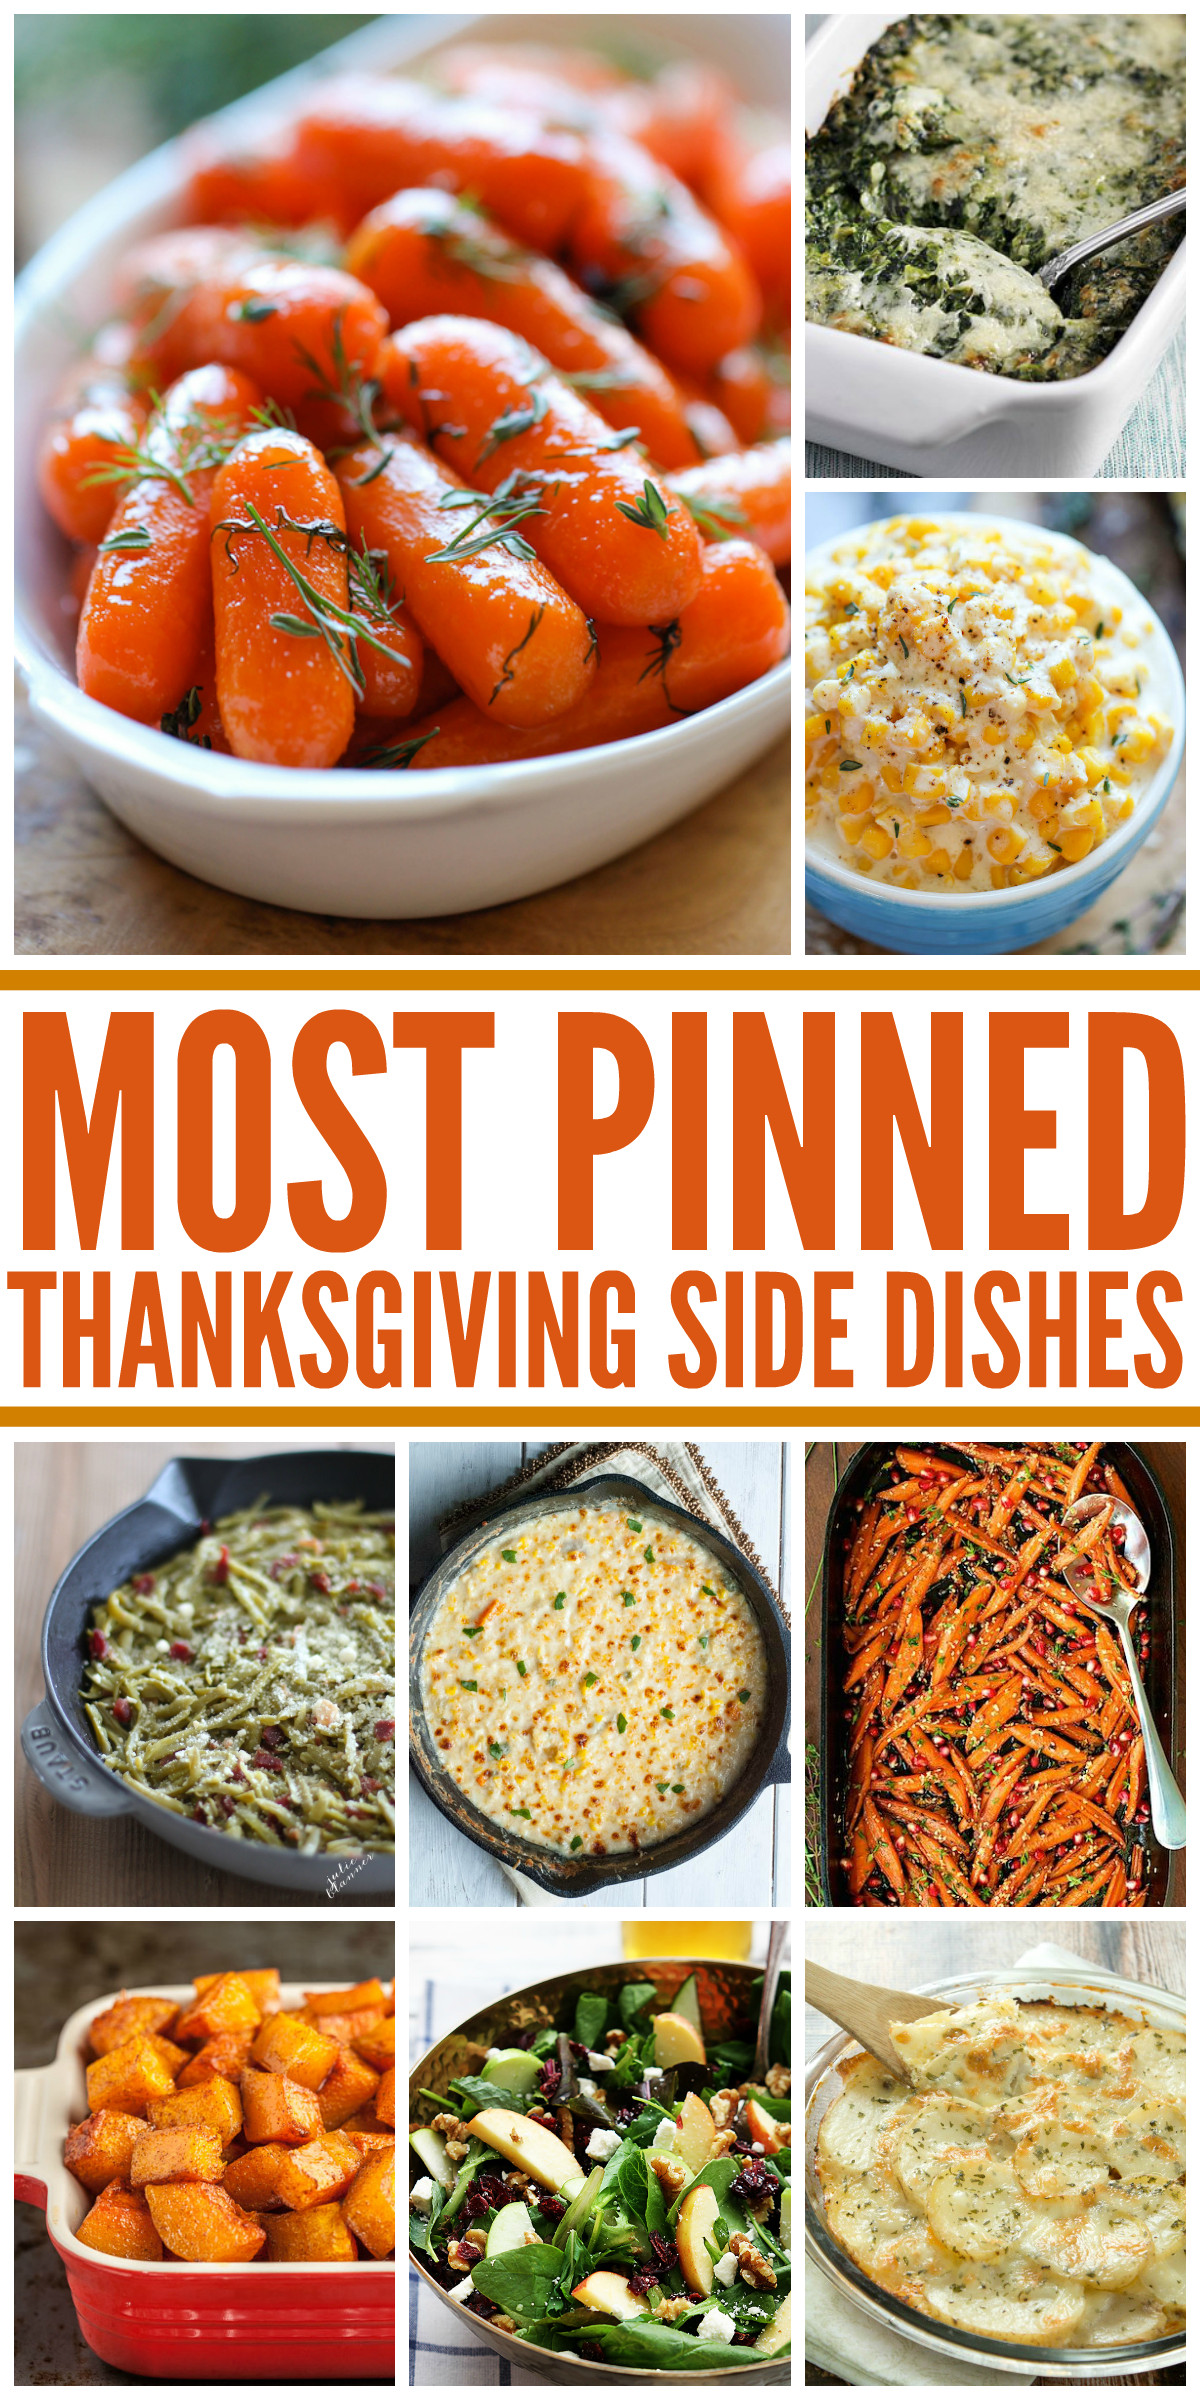 Turkey Dinner Ideas
 25 Most Pinned Holiday Side Dishes